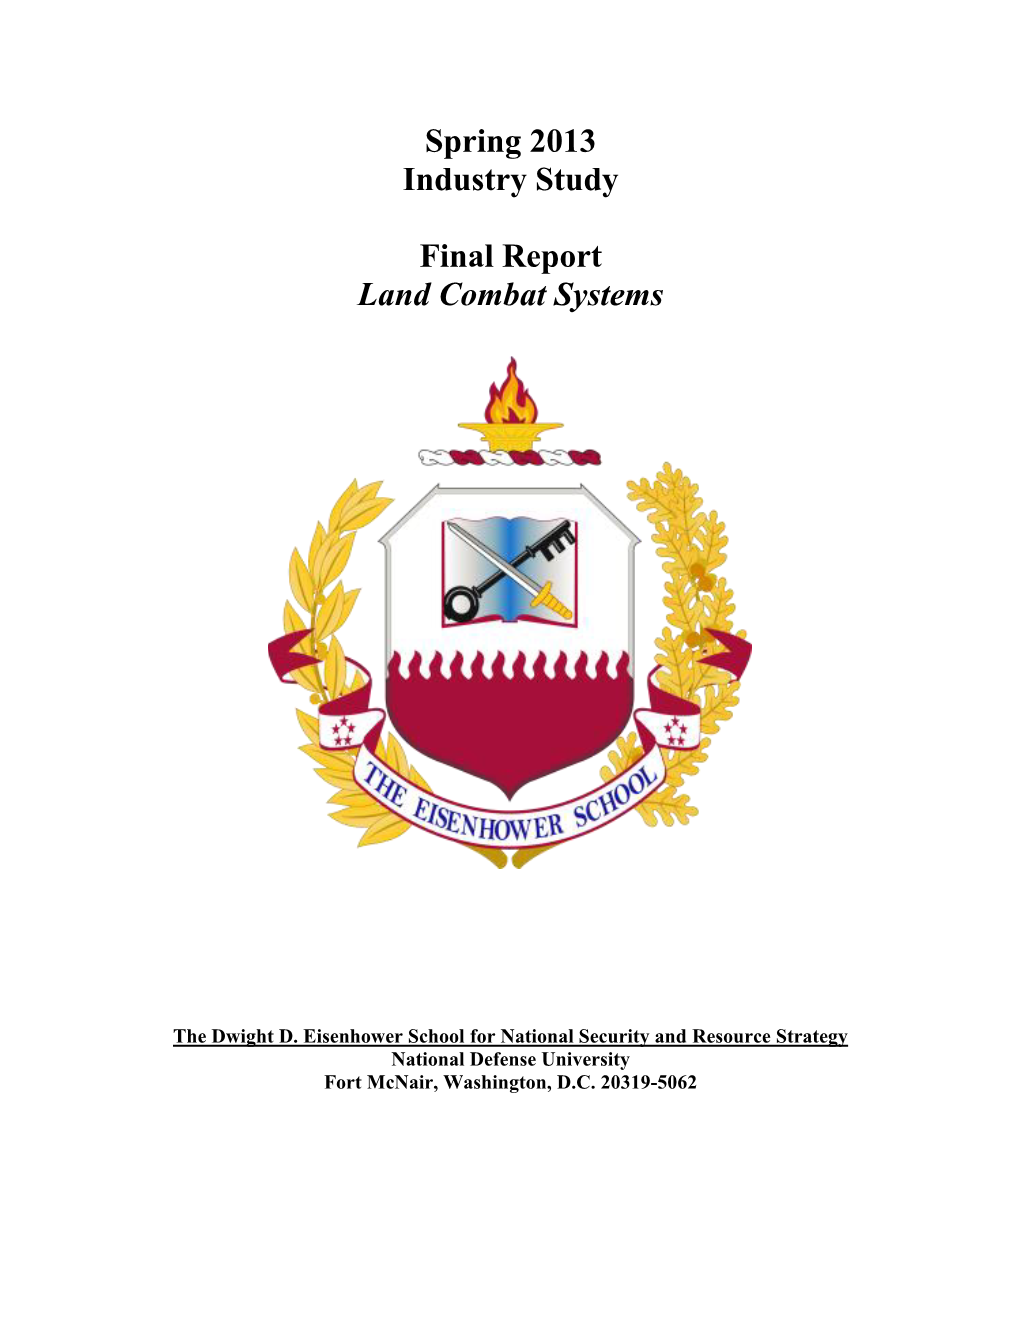 Spring 2013 Industry Study Final Report Land Combat Systems